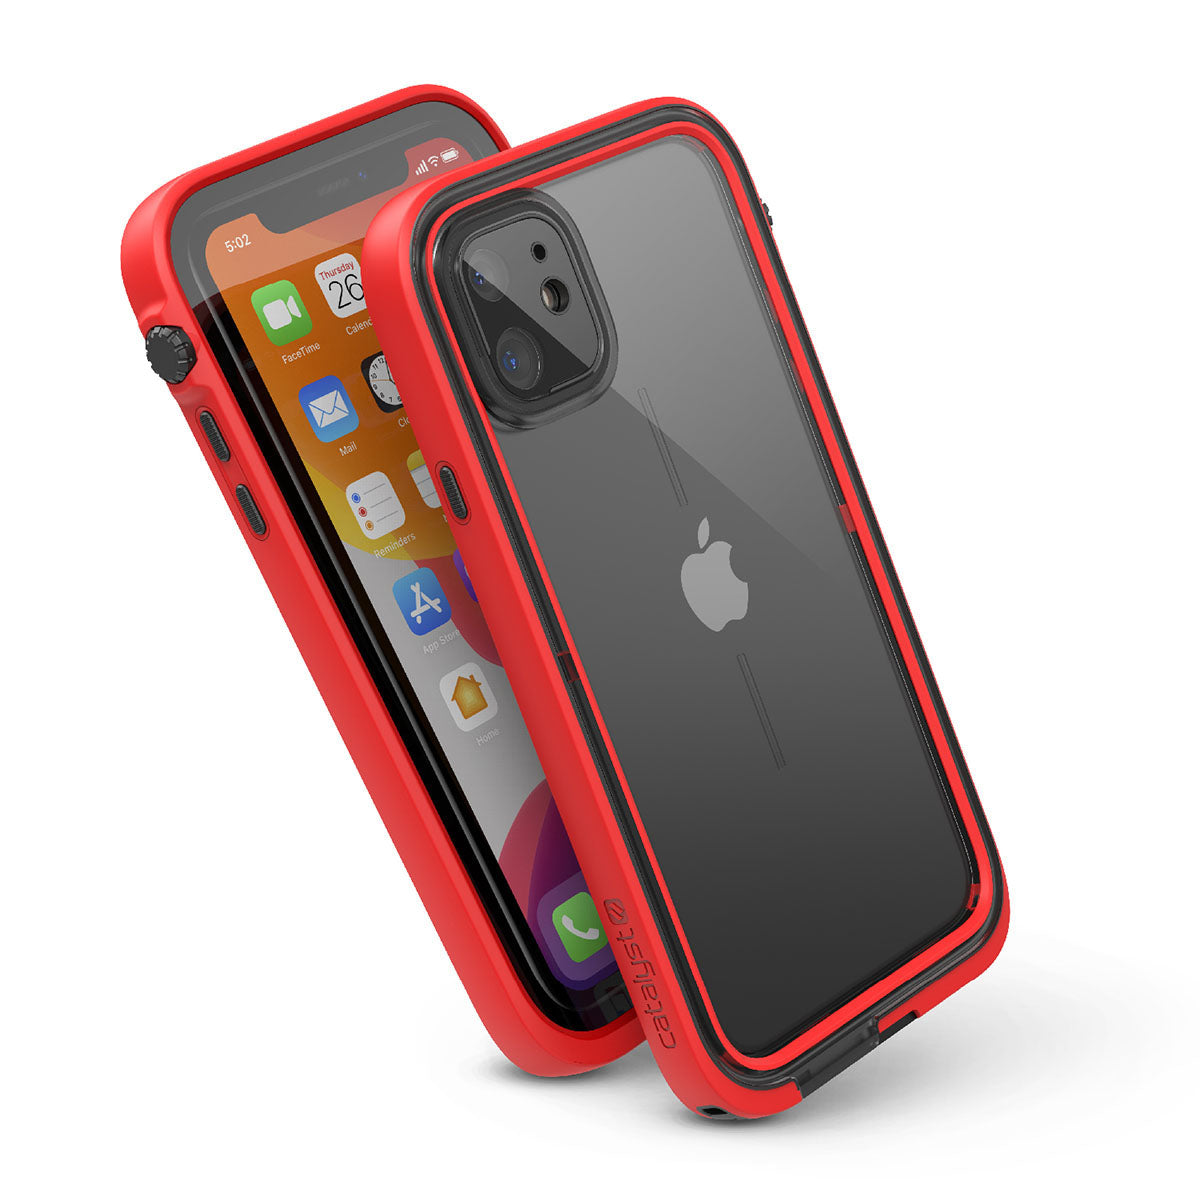 Catalyst iphone 11 series waterproof case in iphone 11 showing the side front and back view of the case in flame red colorway.